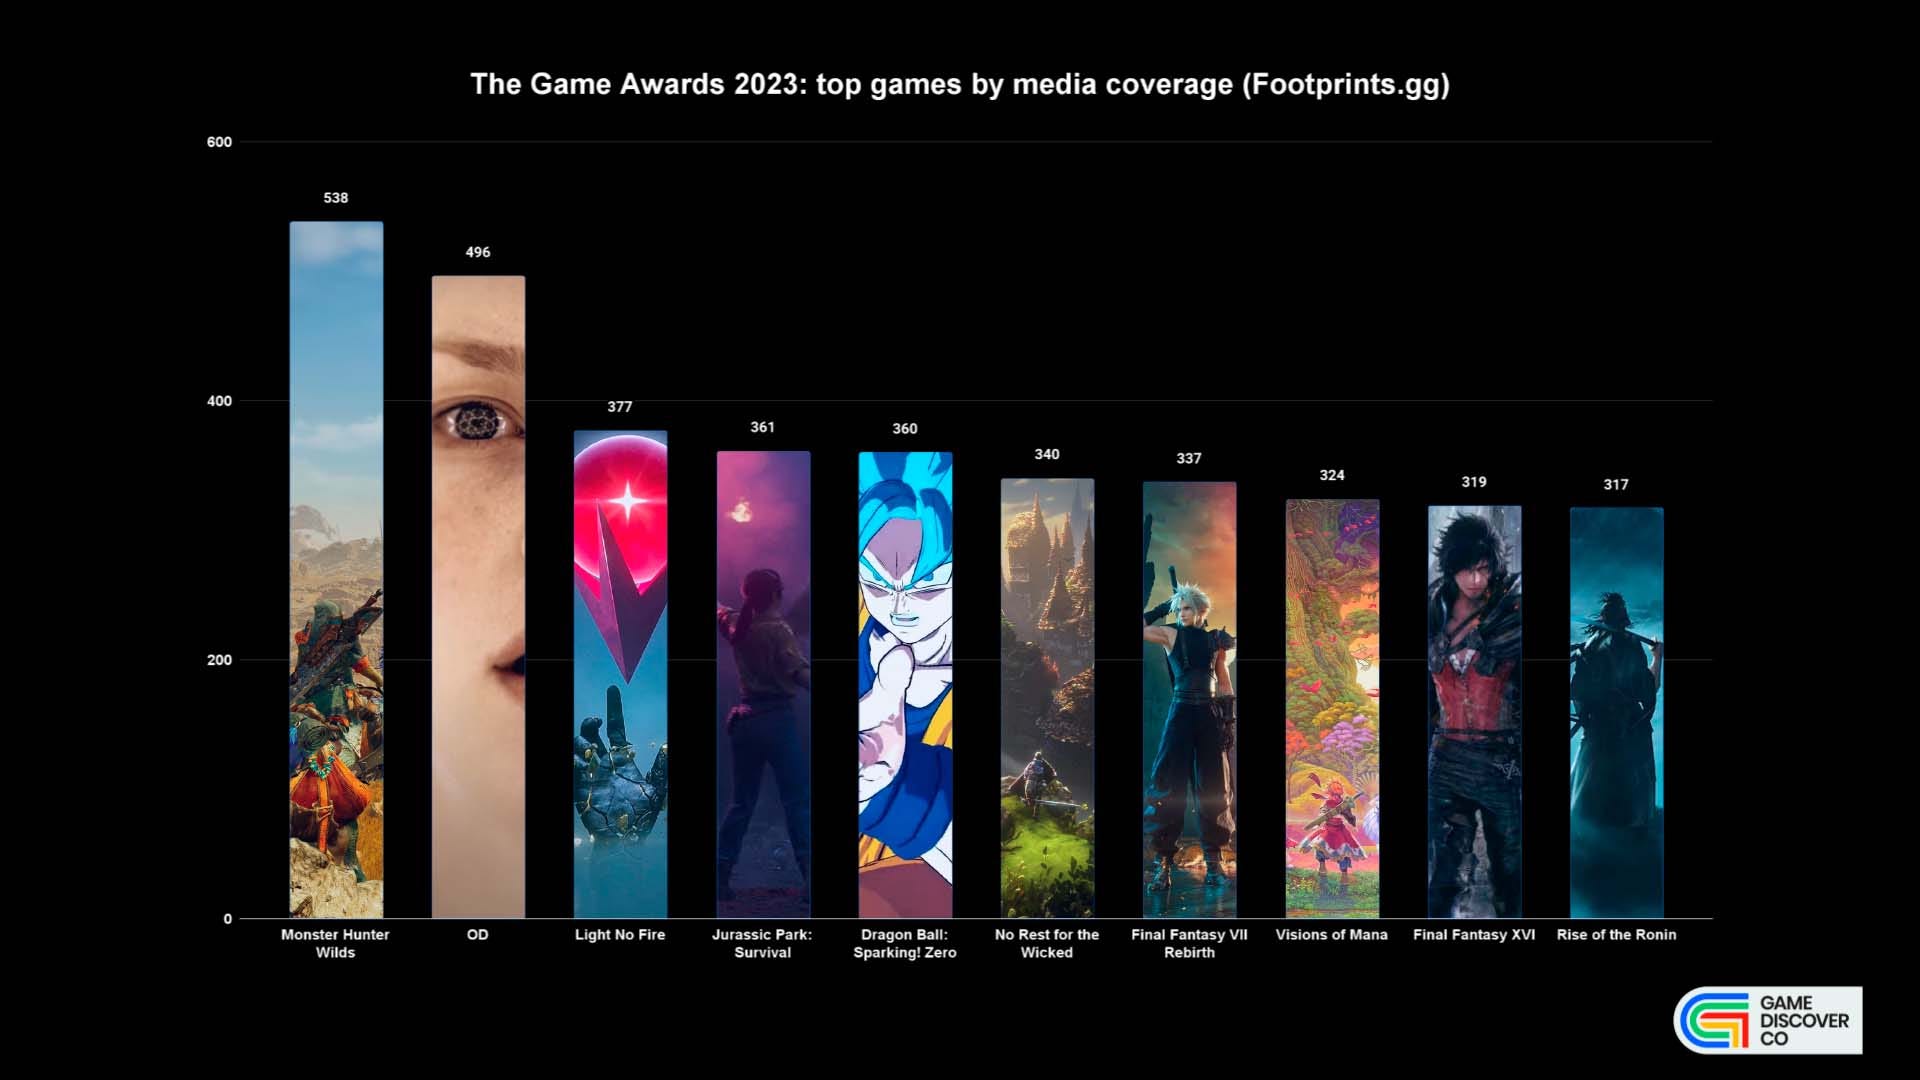 The Game Awards 2023: Gonzo Appears, Marvel's 'Blade' & 'Jurassic